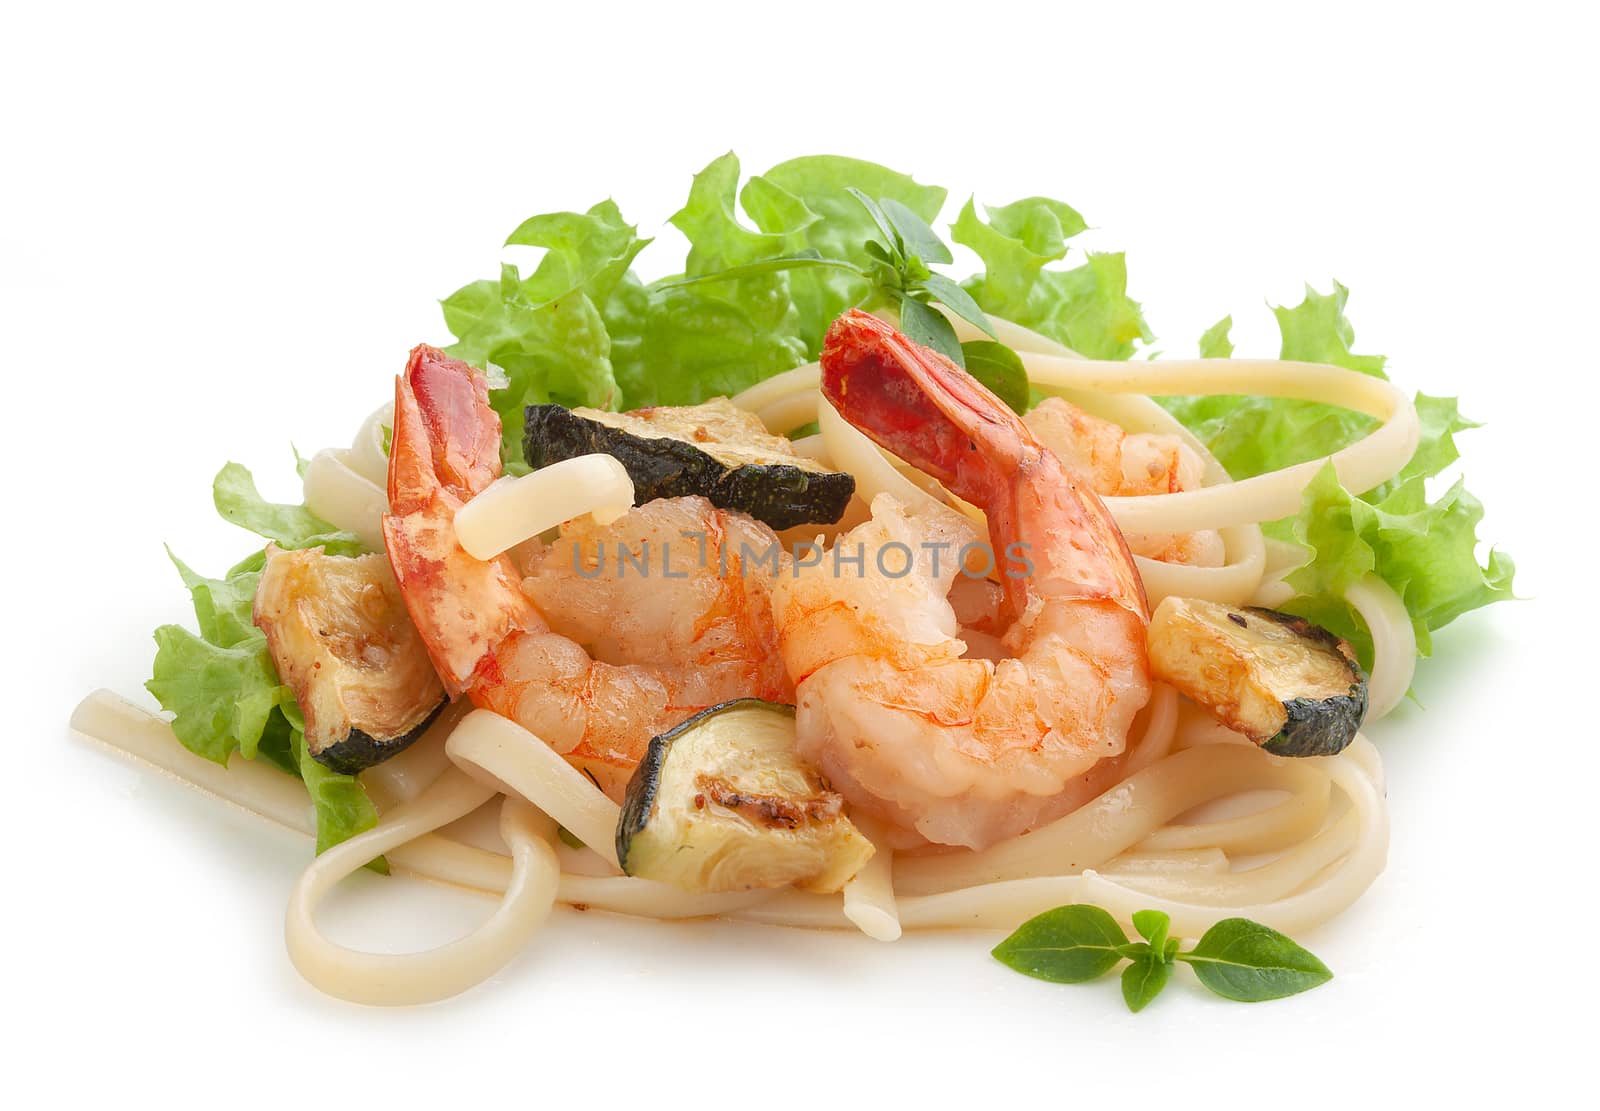 Fried shrimps with pasta, fried squash, basil and lettuce